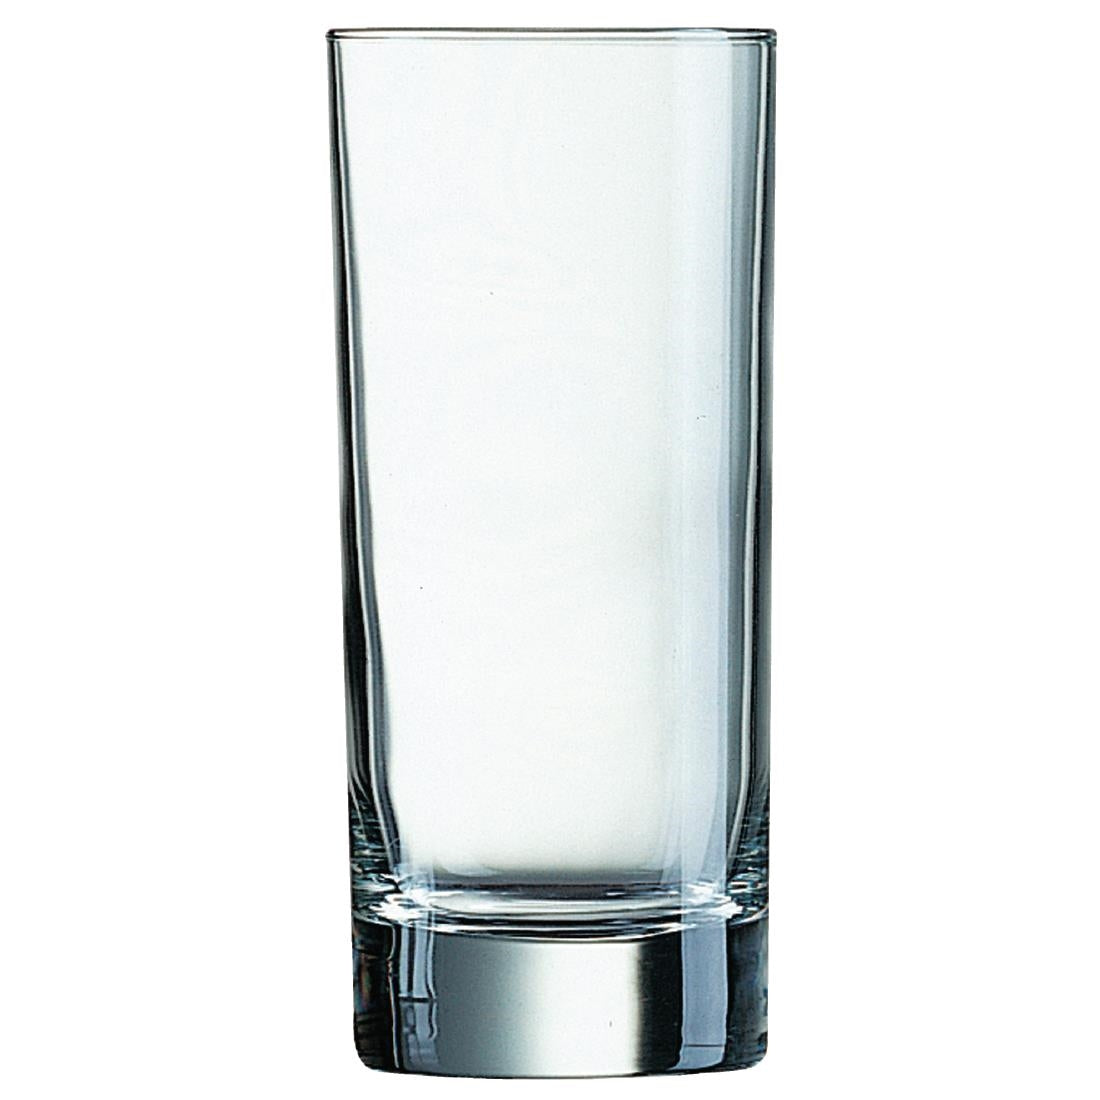 DL178 Arcoroc Islande Hi Ball Glasses 290ml CE Marked (Pack of 48) JD Catering Equipment Solutions Ltd